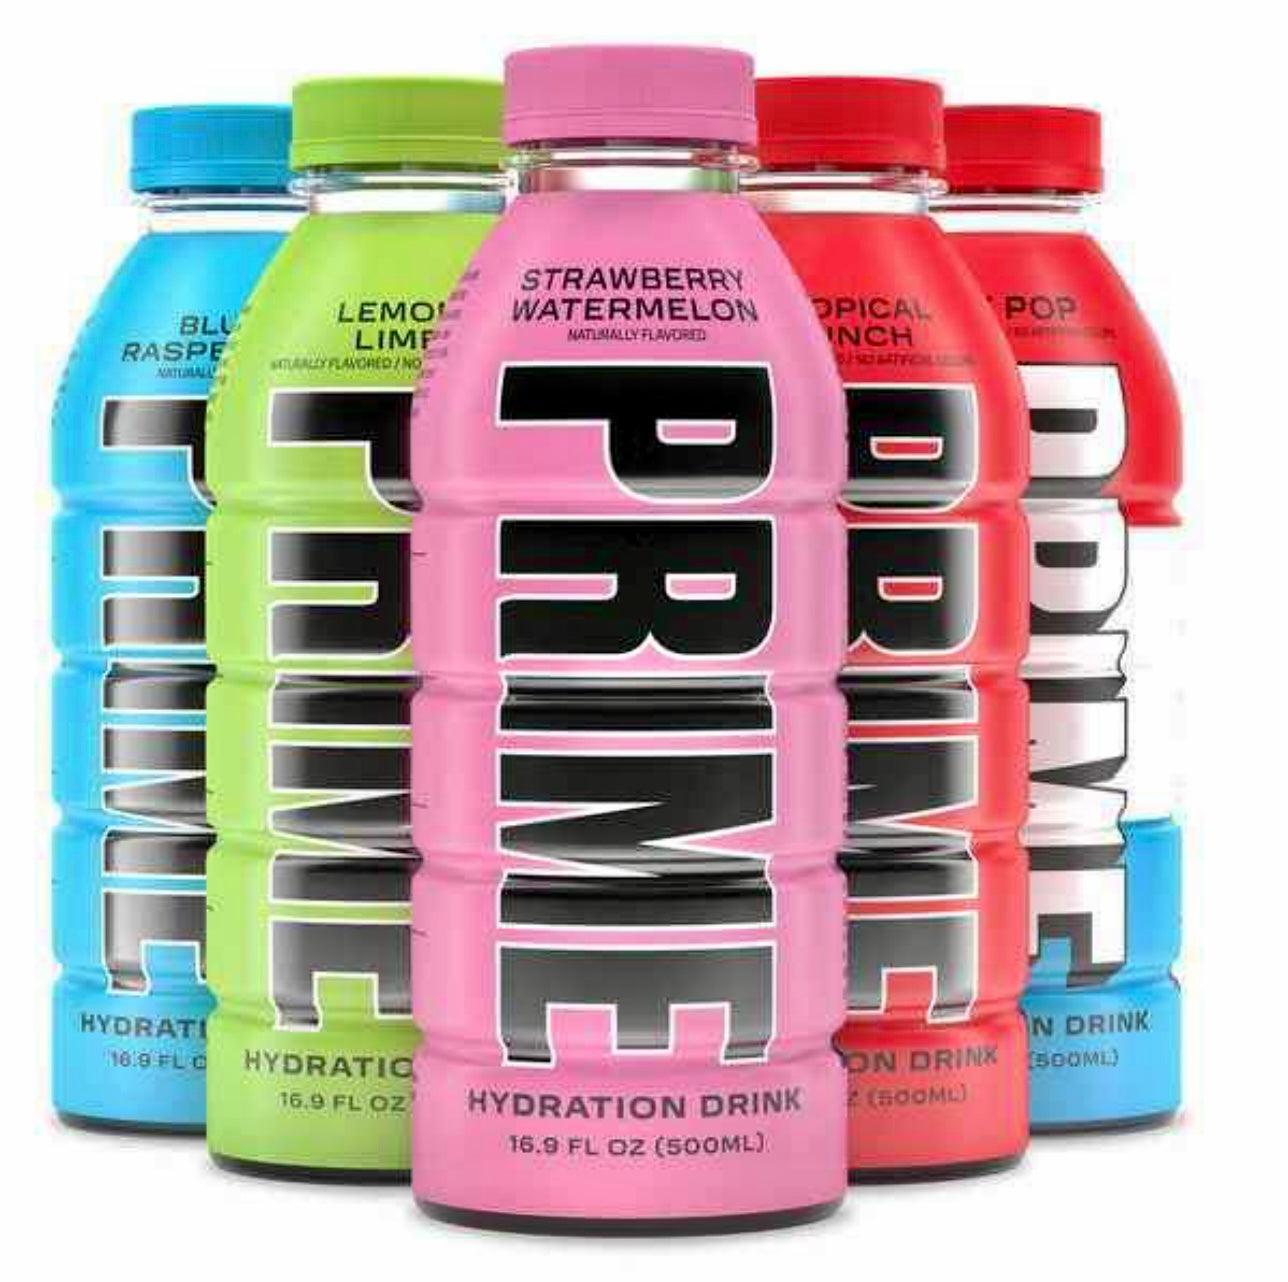 Prime Hydration Energy Drink Mixed Flavors Pack 8x500ml - The Snacks Box - Asian Snacks Store - The Snacks Box - Korean Snack - Japanese Snack